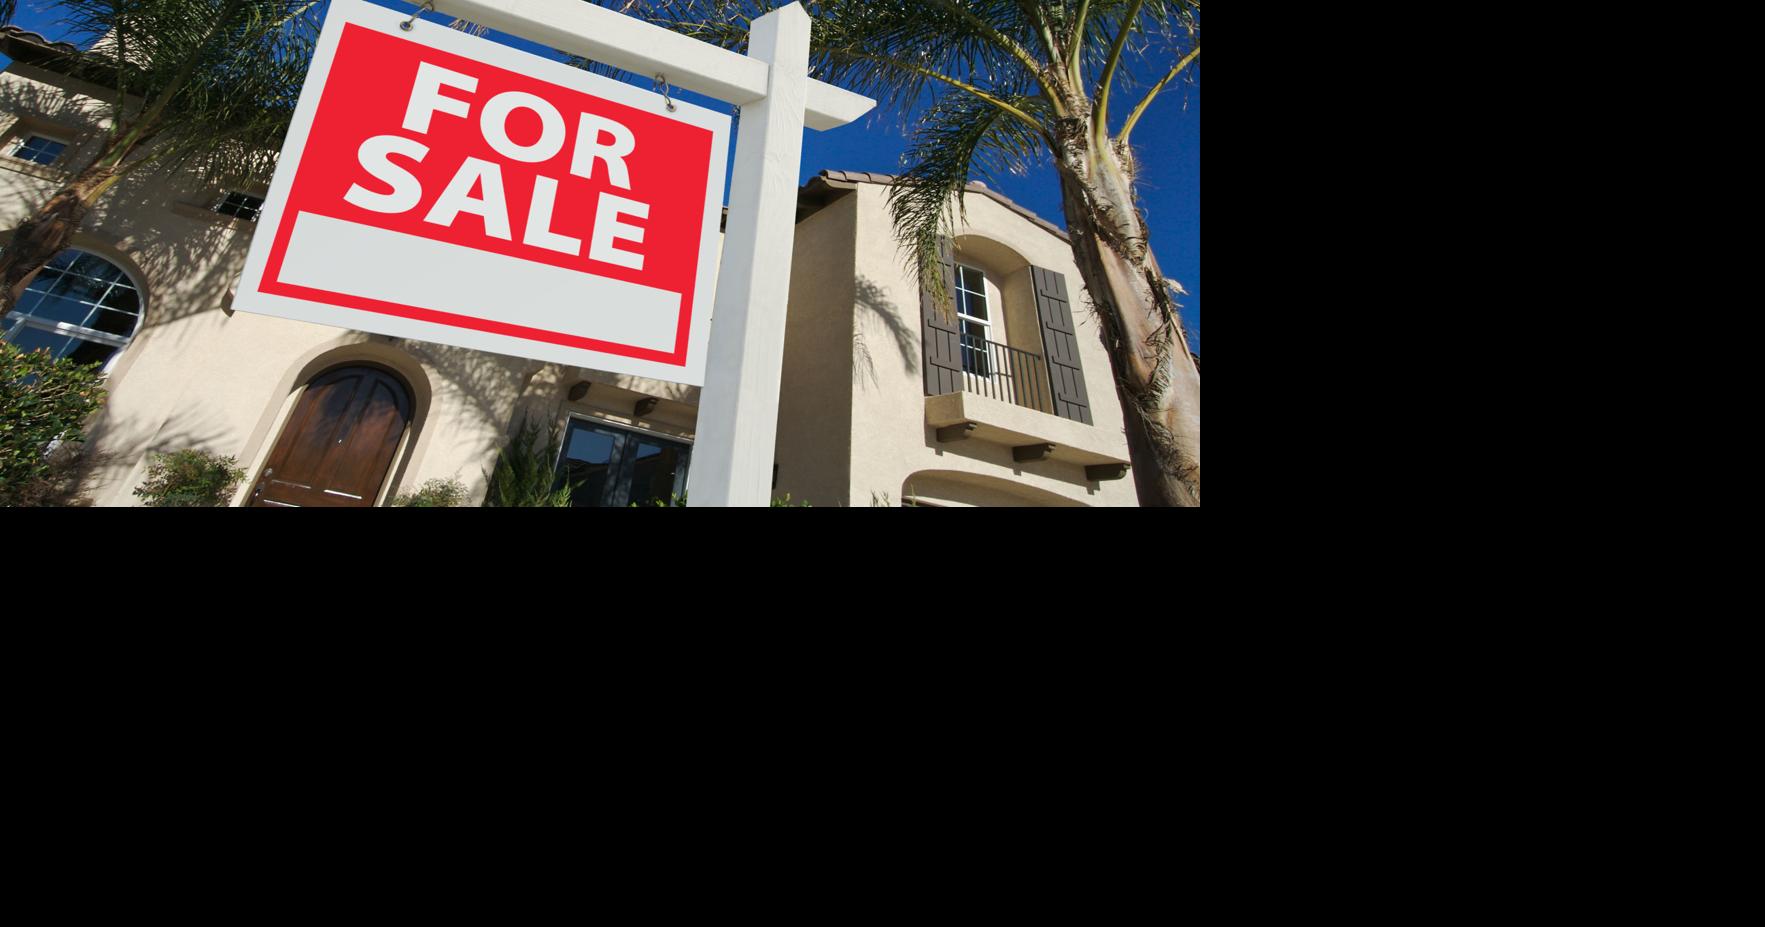 St. Tammany property transfers, Sept. 20-26, 2022: See a list of home and other sales